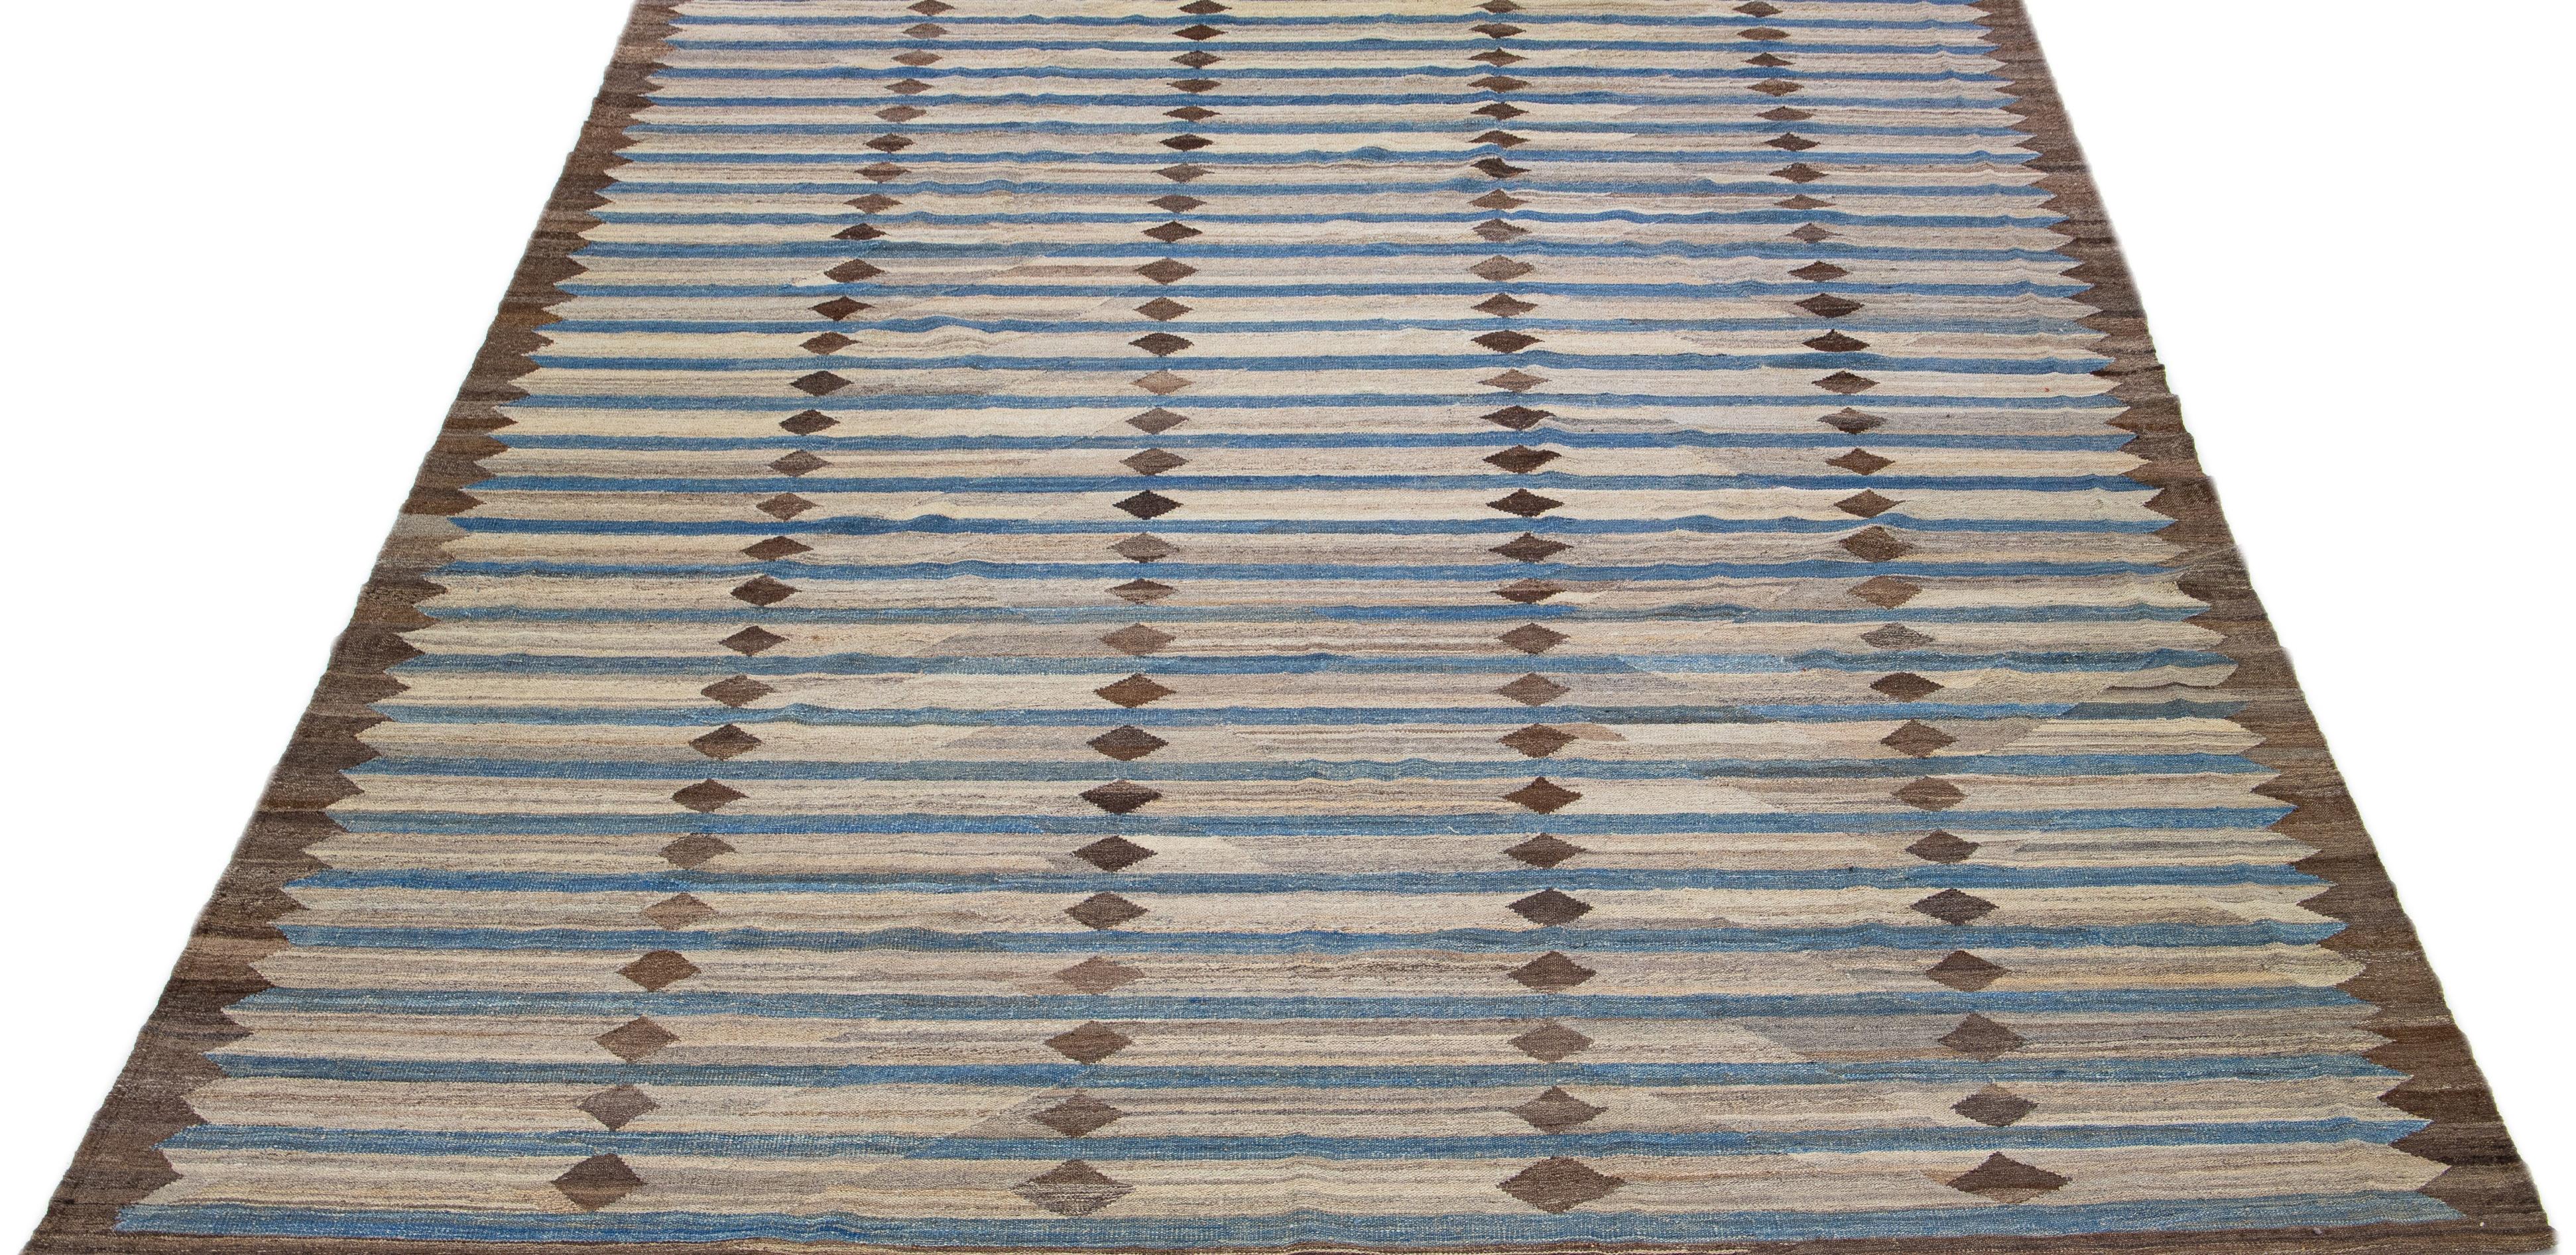 This Deco flatweave wool rug exhibits a fascinating brown color field with blue accents, creating a contemporary and aesthetically-pleasing Geometric design. This classic design motif can be incorporated into any room, providing a stylish and